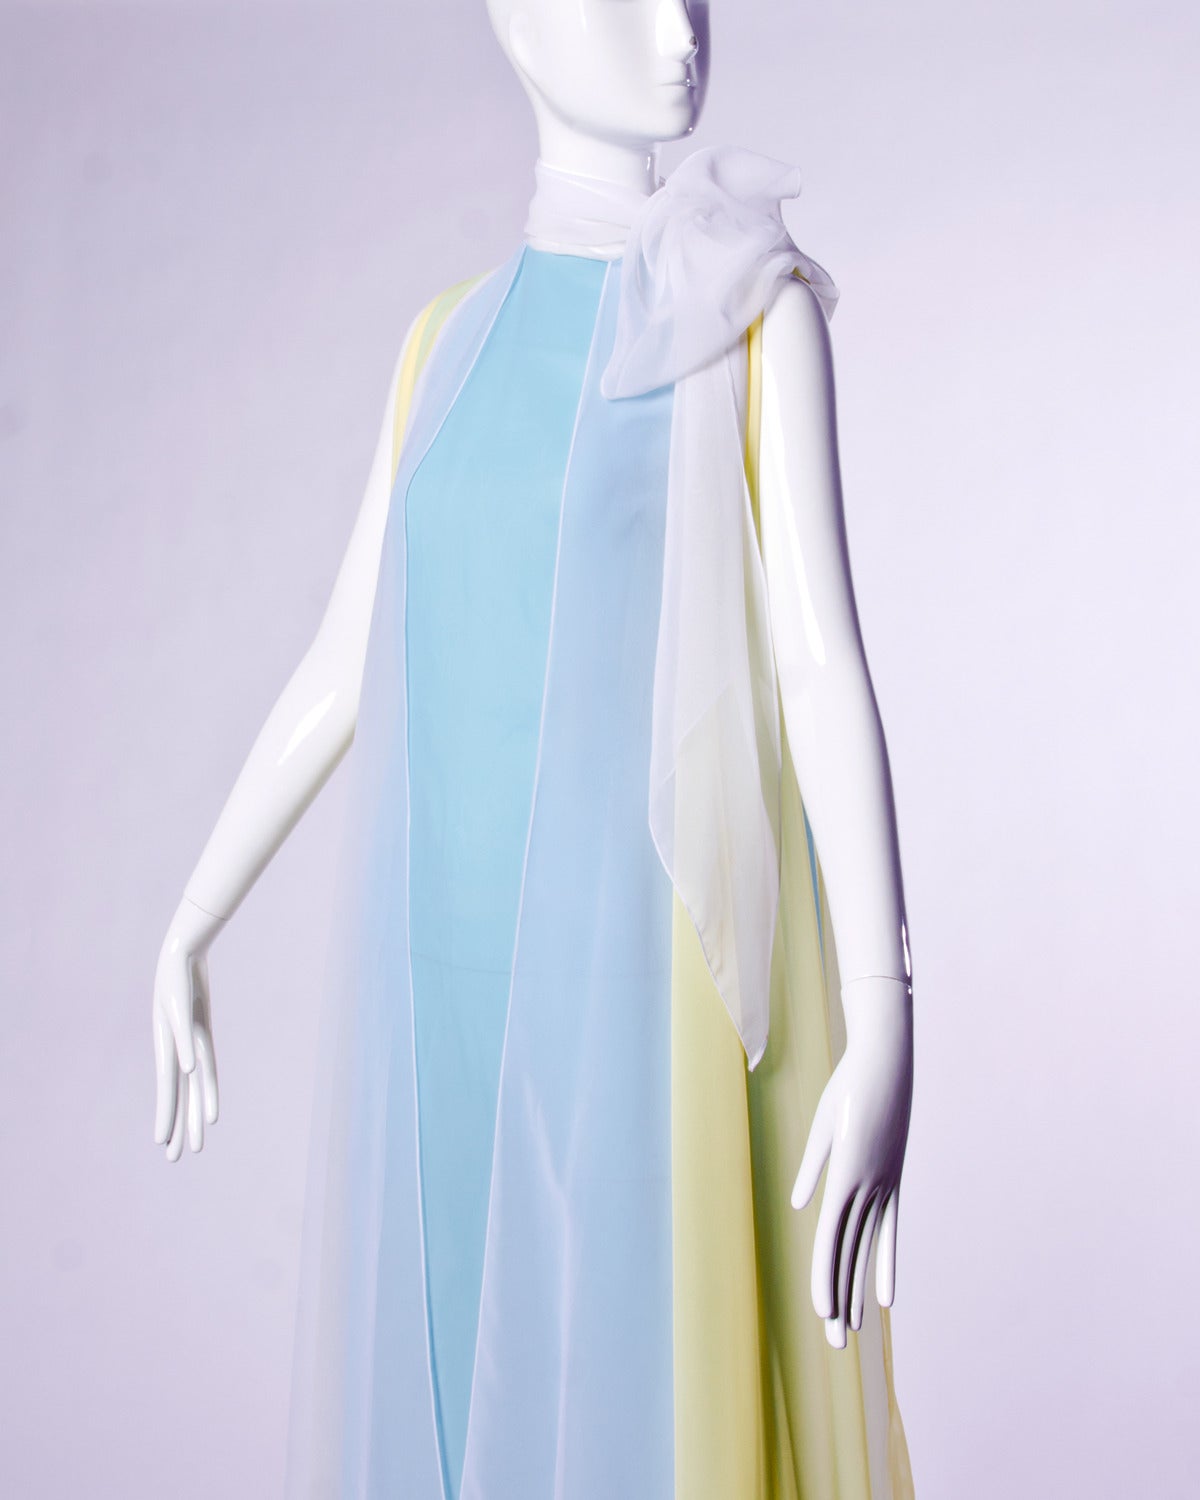 Phenomenal 1970s vintage maxi dress in pastel blue, yellow and white. This dress features a full sweep and color block design. Attached scarf can be worn tied at the neck or let hang loose.

Details:

Fully Lined
Back Zip and Hook